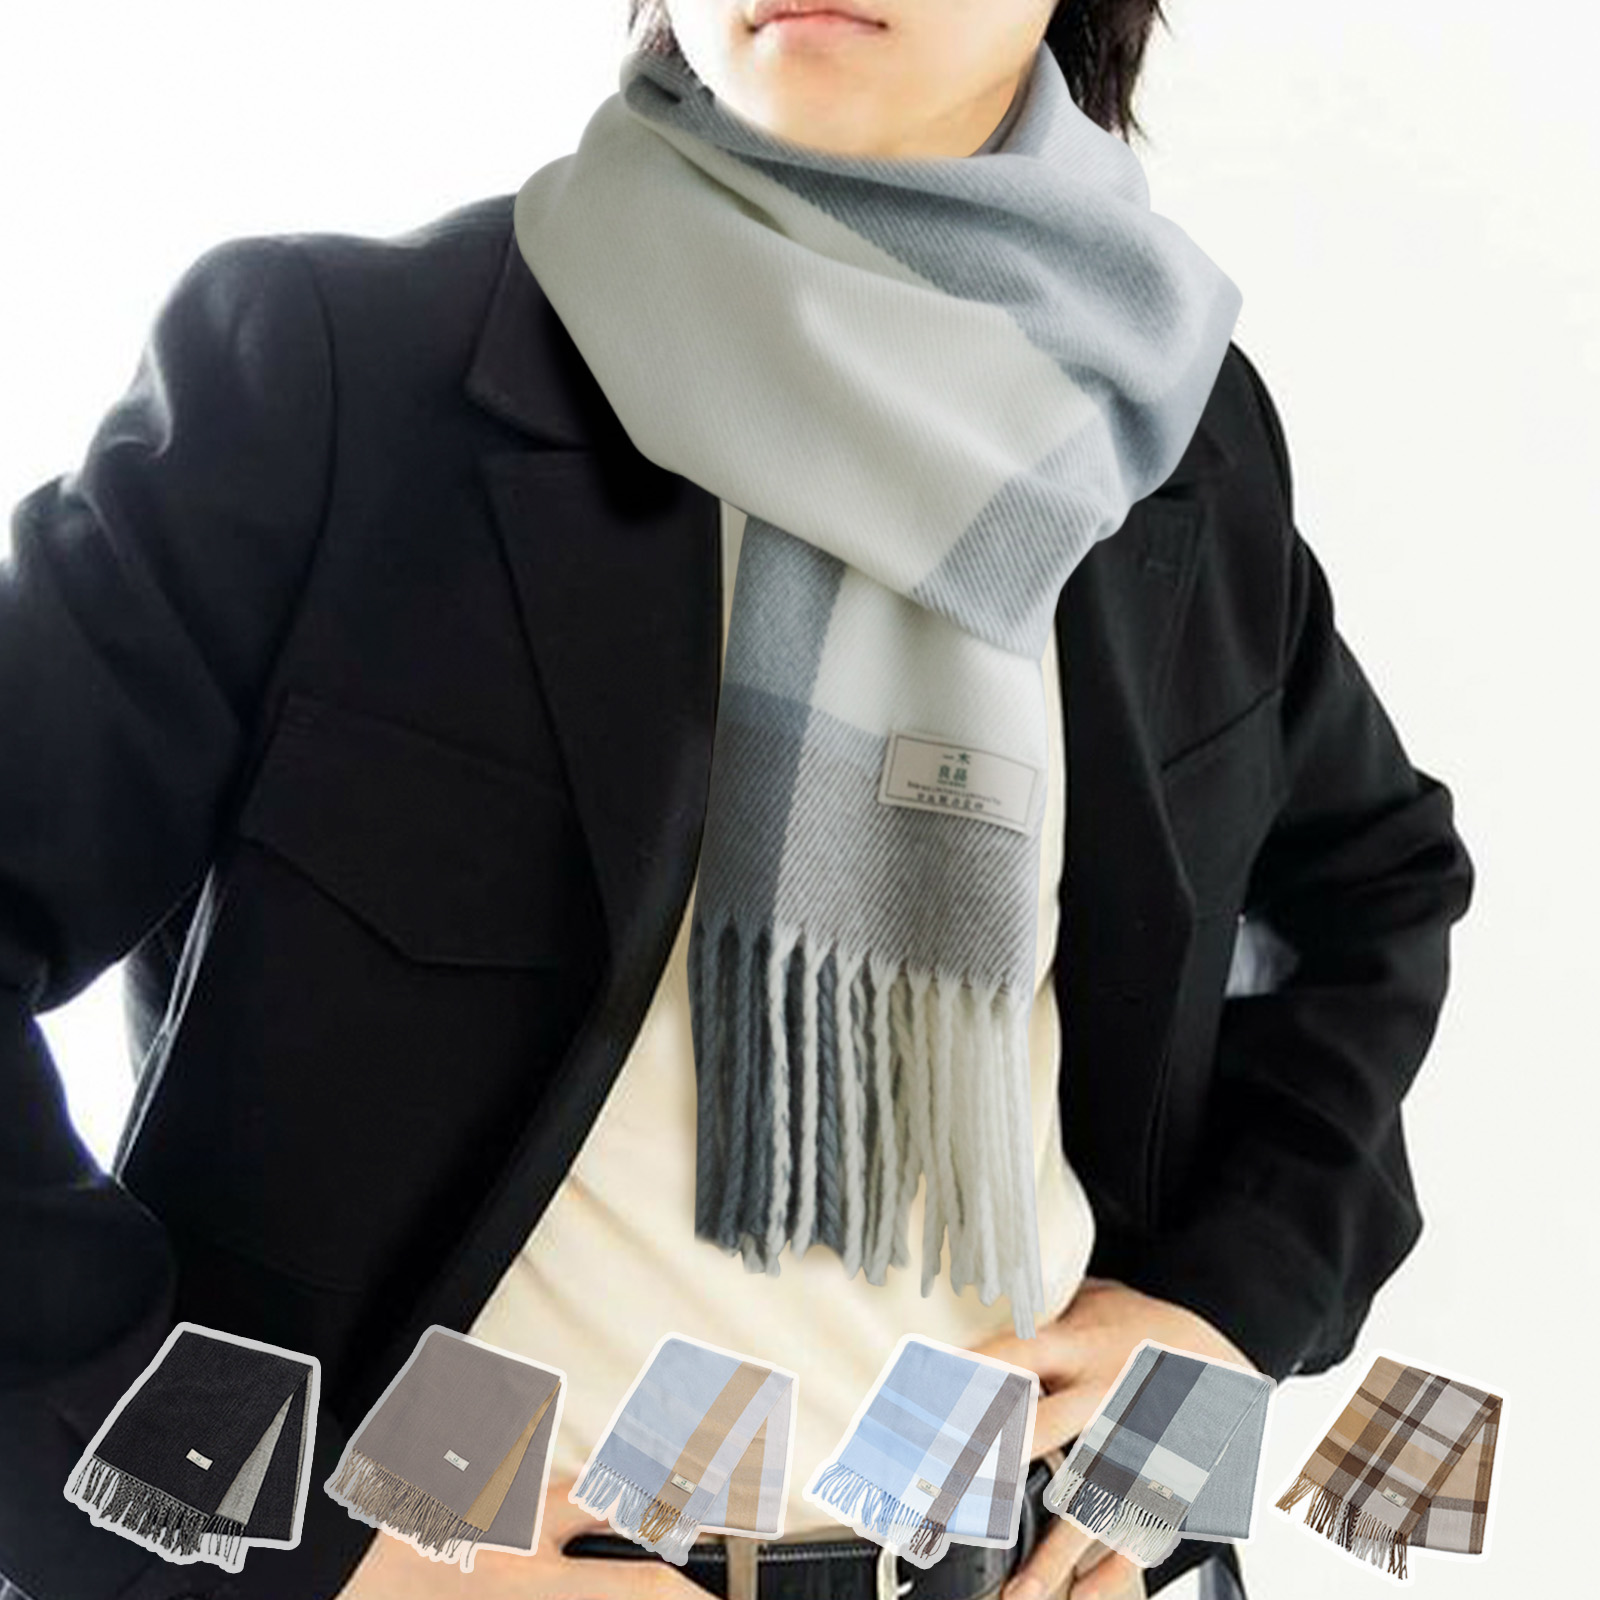 [ Japan ..] muffler men's man and woman use student large size scarf muffler plain soft . stole warm light protection against cold cold-protection plain autumn winter for stylish neck cold . measures 